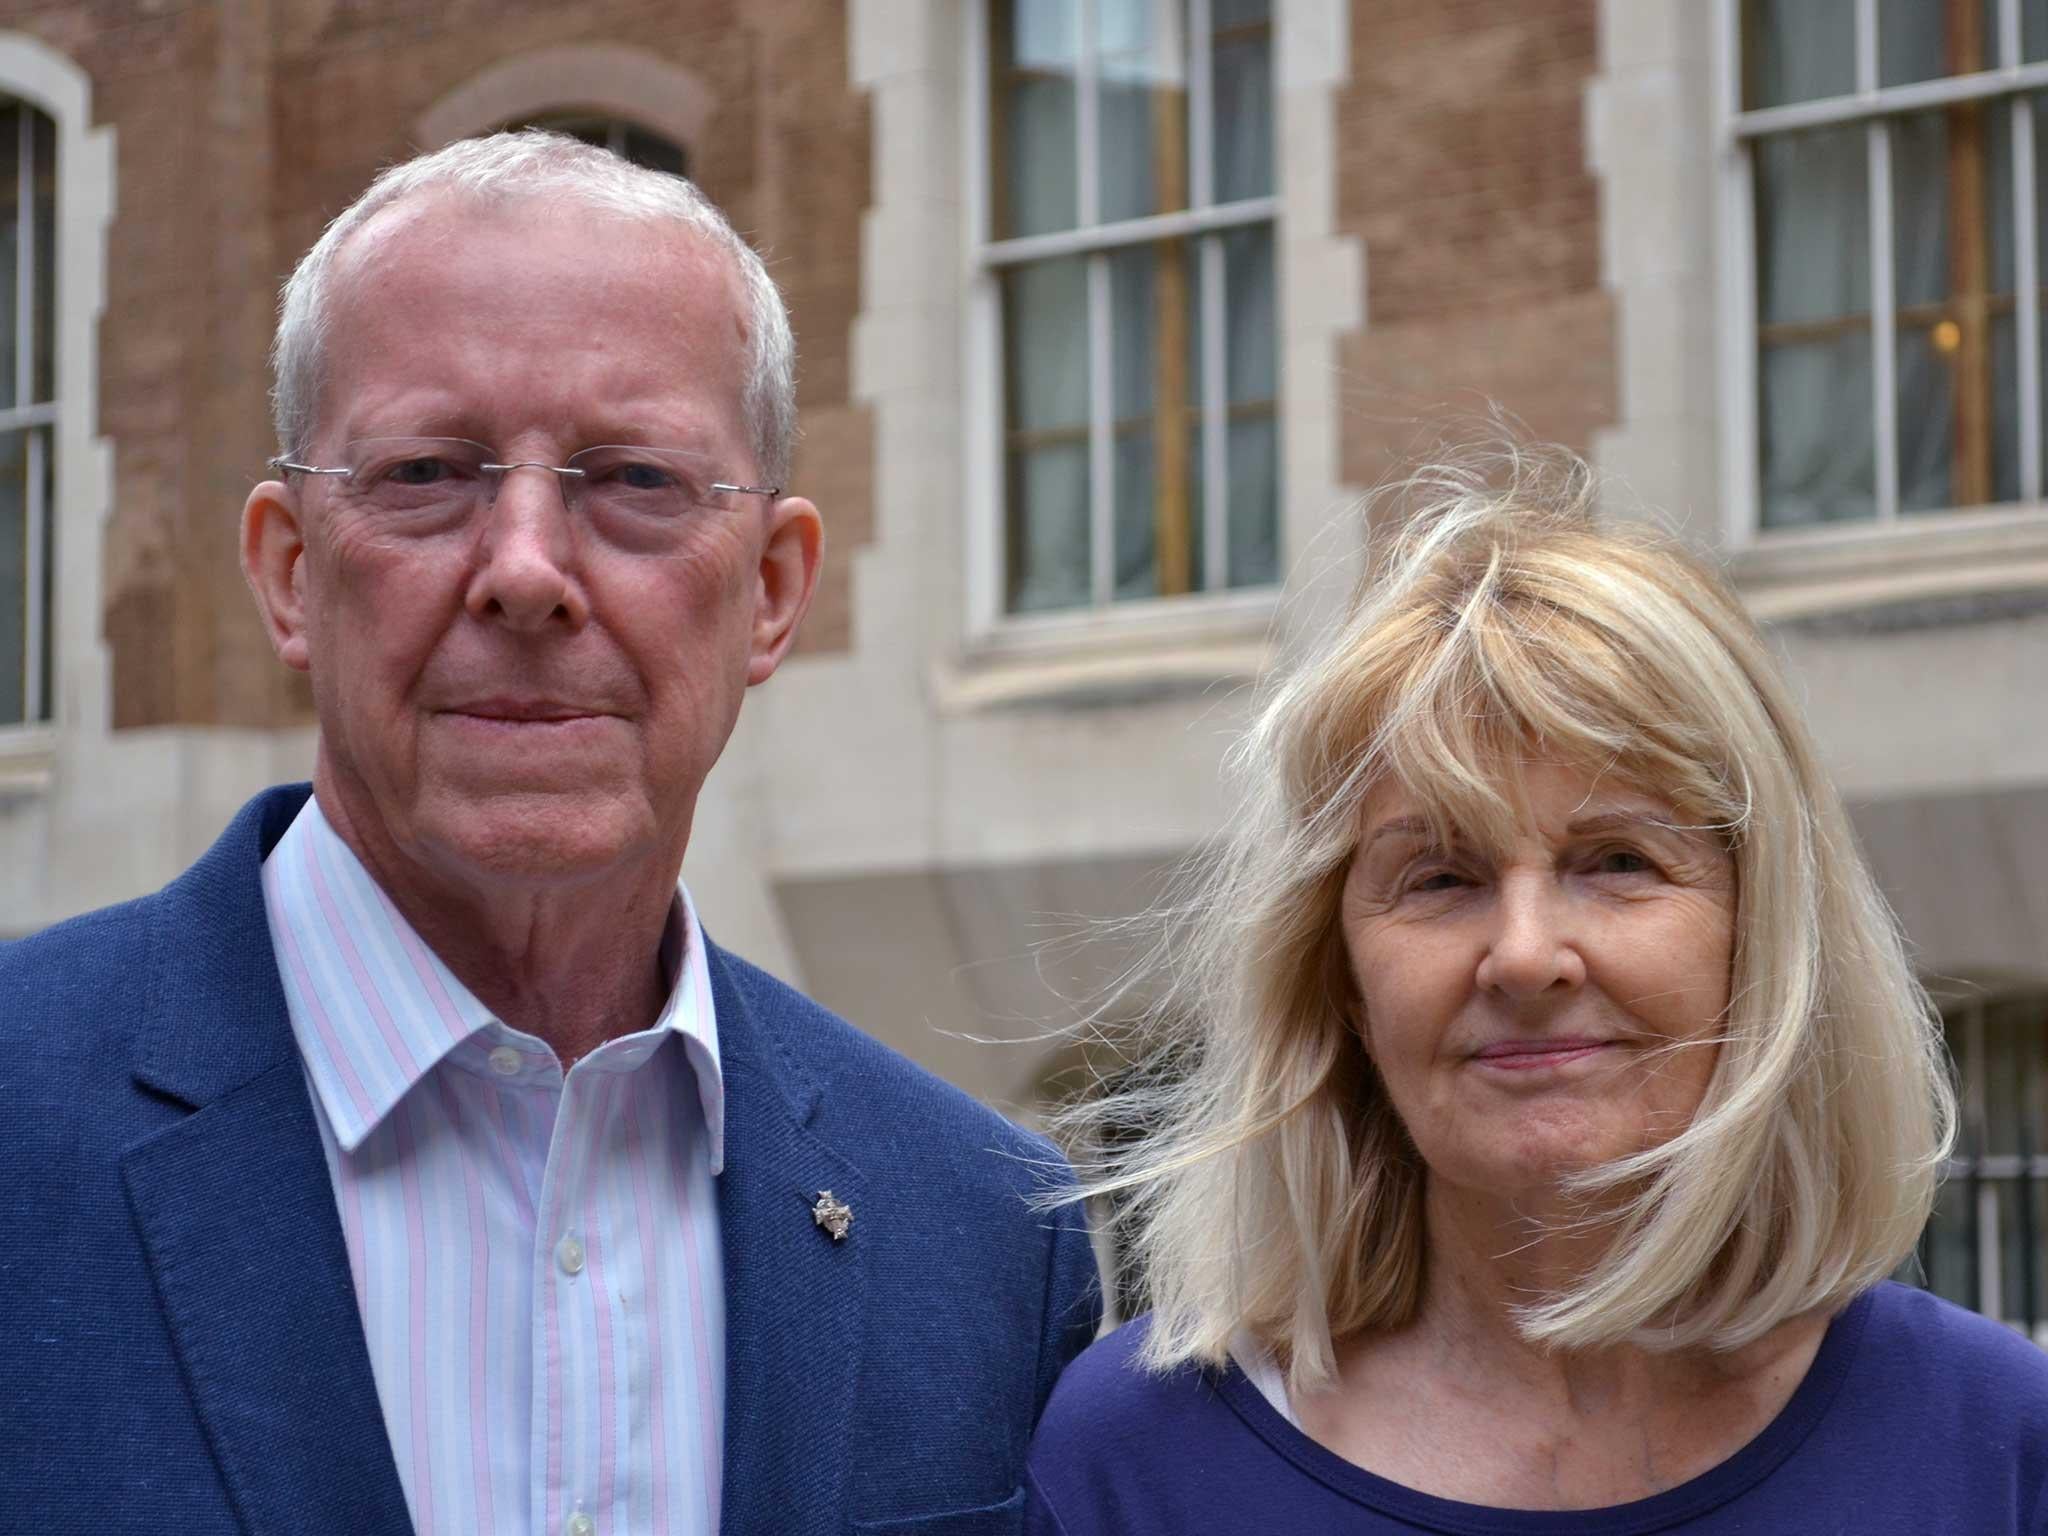 Roger Bacon, with his wife Maureen, said the report could lead to court actions